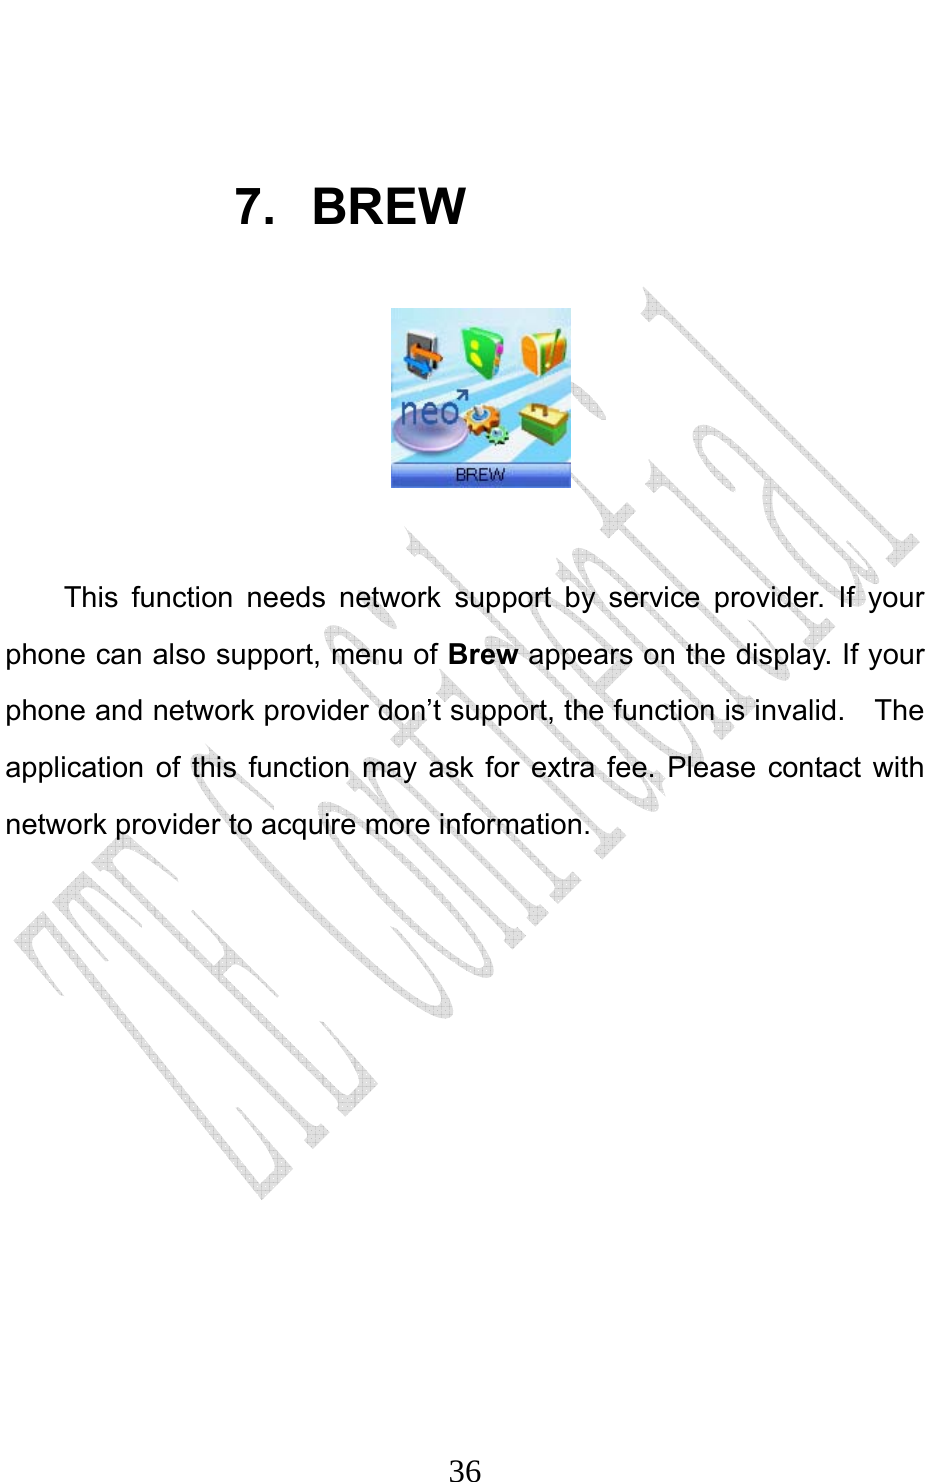                              36 7. BREW   This function needs network support by service provider. If your phone can also support, menu of Brew appears on the display. If your phone and network provider don’t support, the function is invalid.    The application of this function may ask for extra fee. Please contact with network provider to acquire more information. 